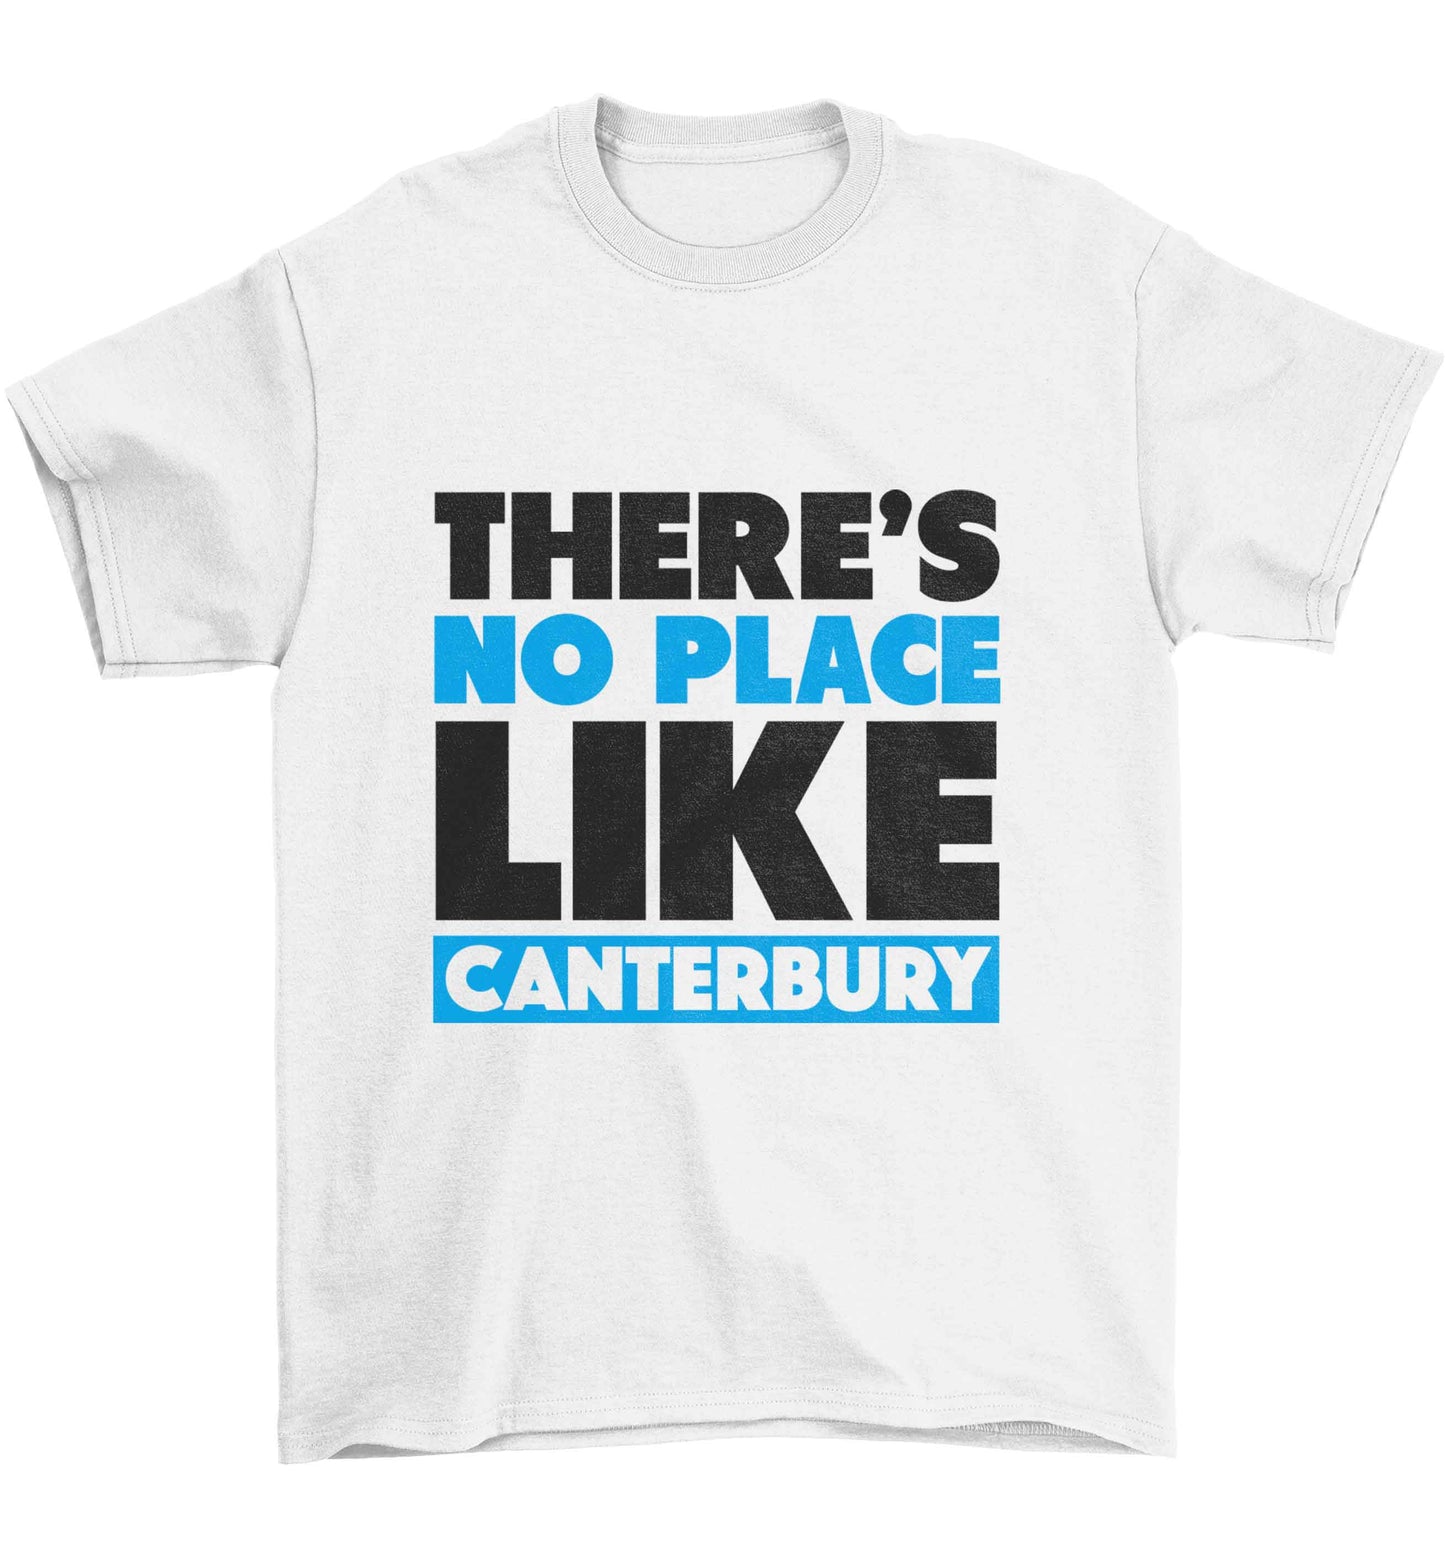 There's no place like Canterbury Children's white Tshirt 12-13 Years